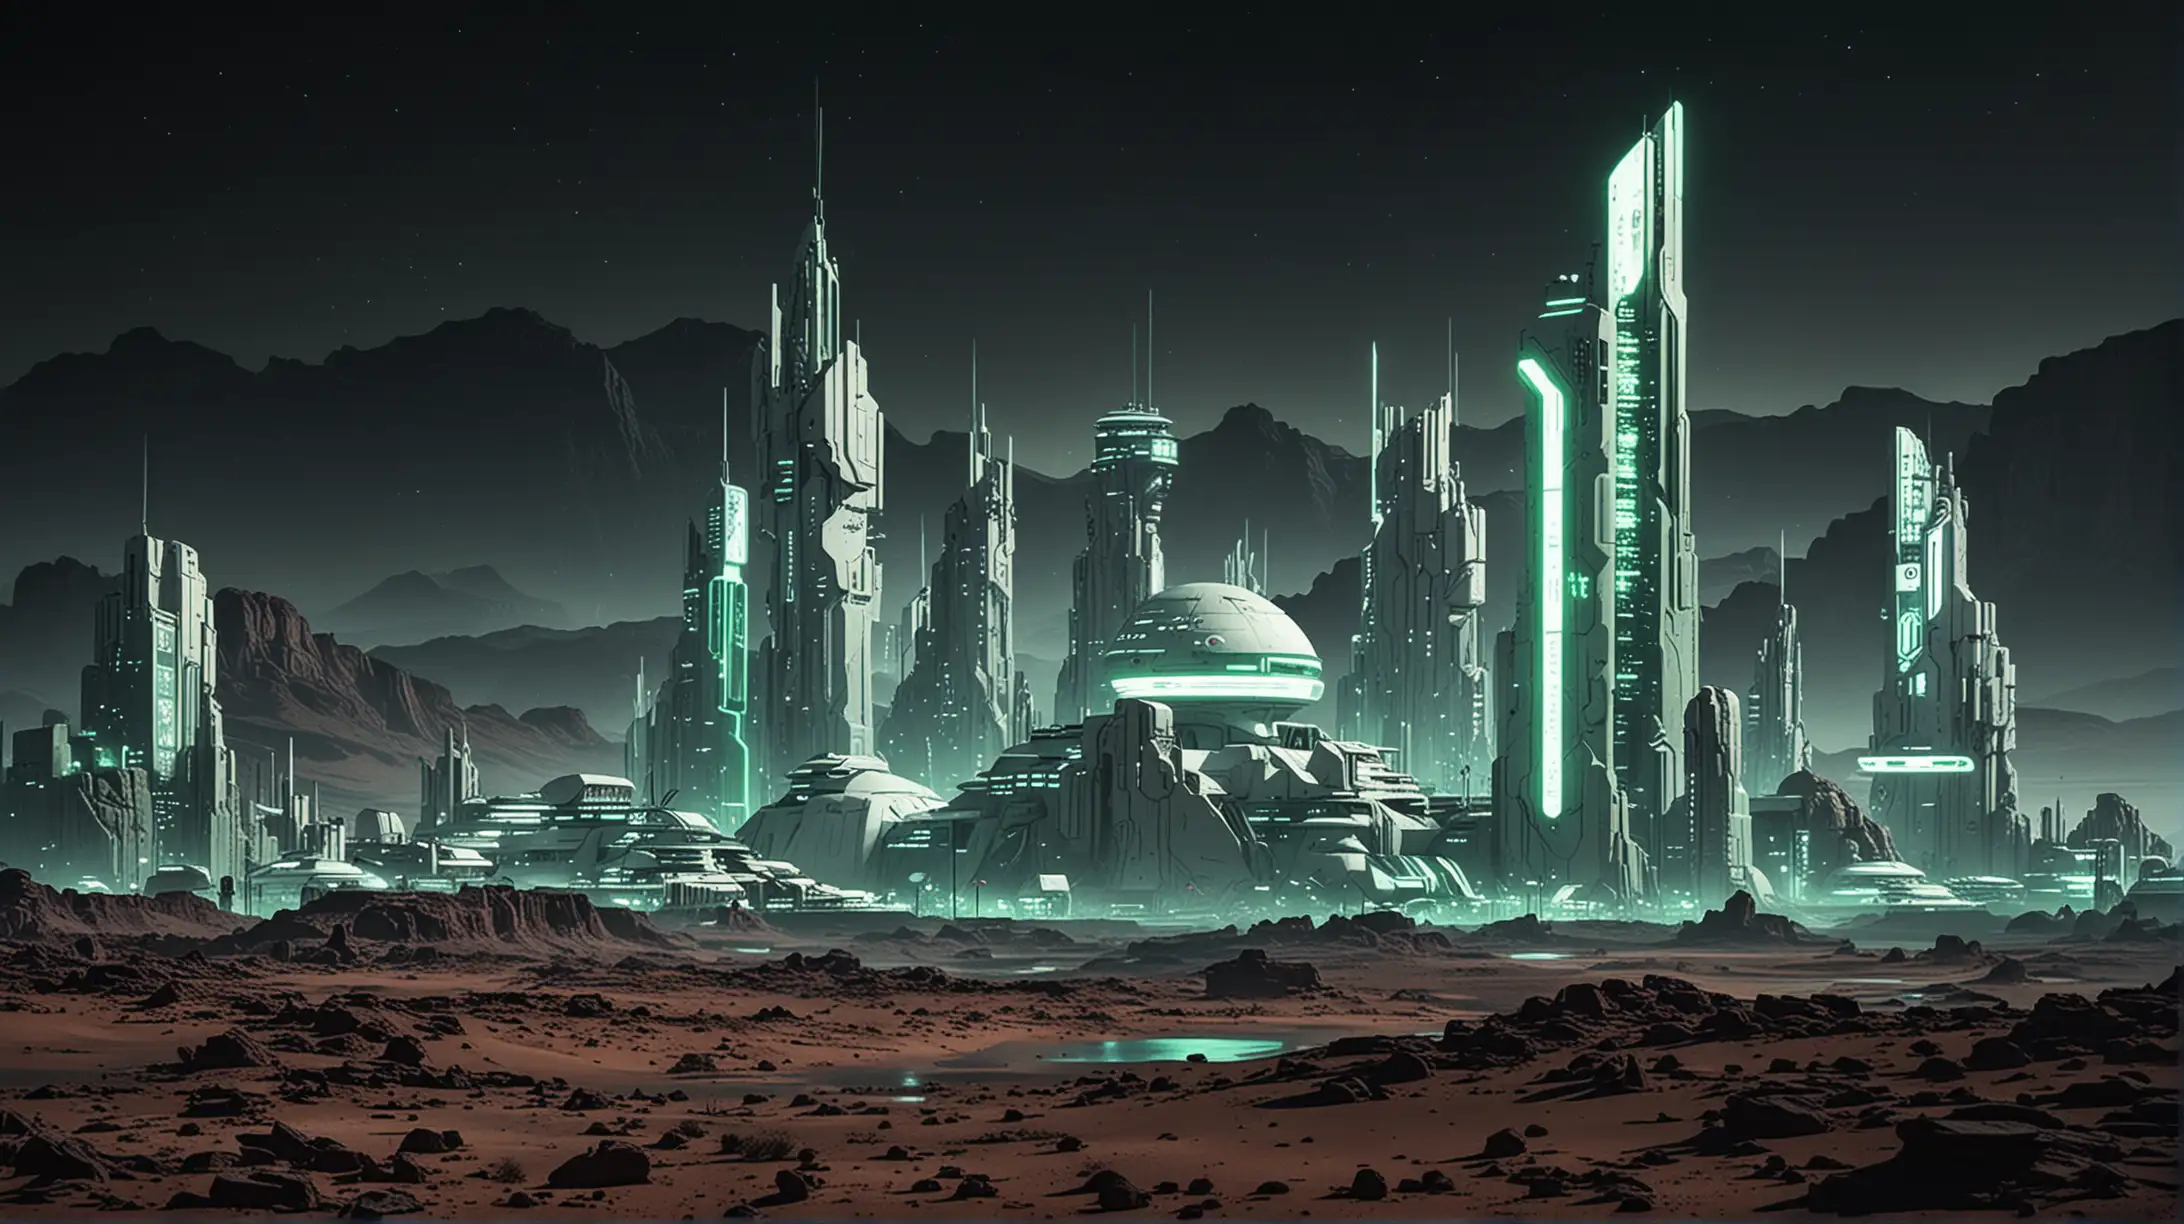 night time image of neon lit white buildings in a cyberpunk city skyline, on Martian surface green rocky desert